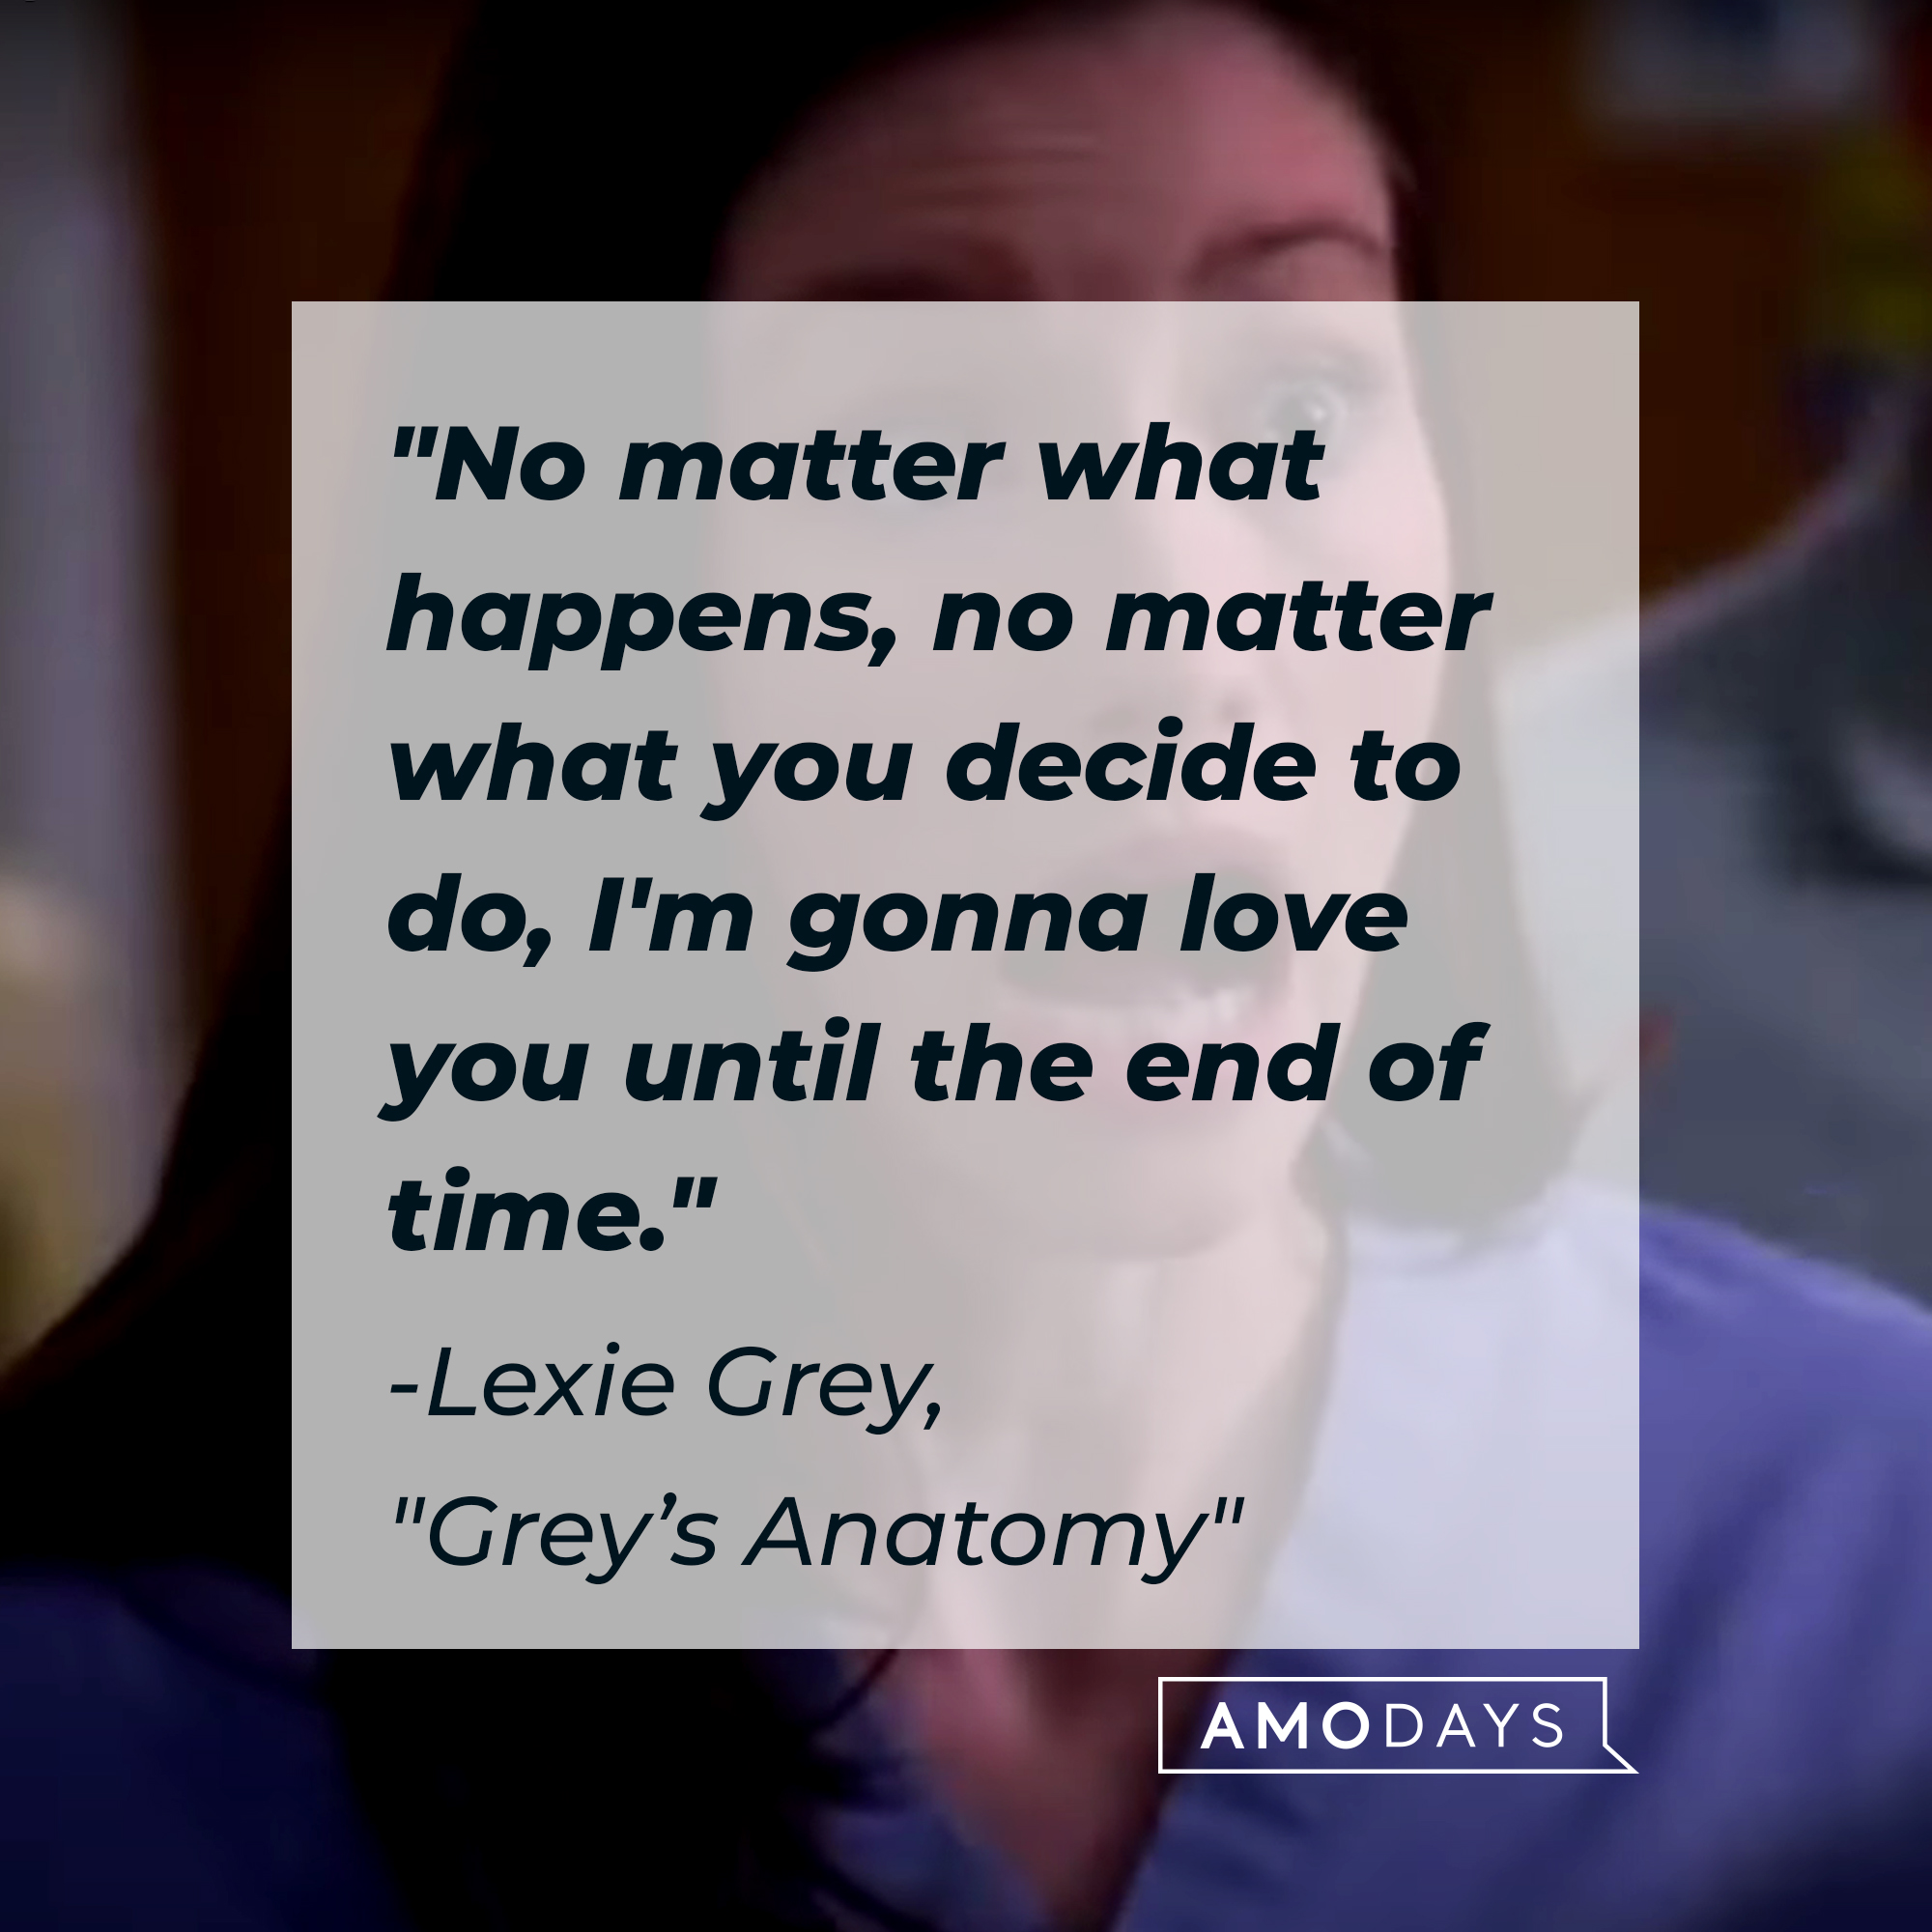 Lexie Grey with her quote: "No matter what happens, no matter what you decide to do, I'm gonna love you until the end of time." | Source: Facebook.com/GreysAnatomy